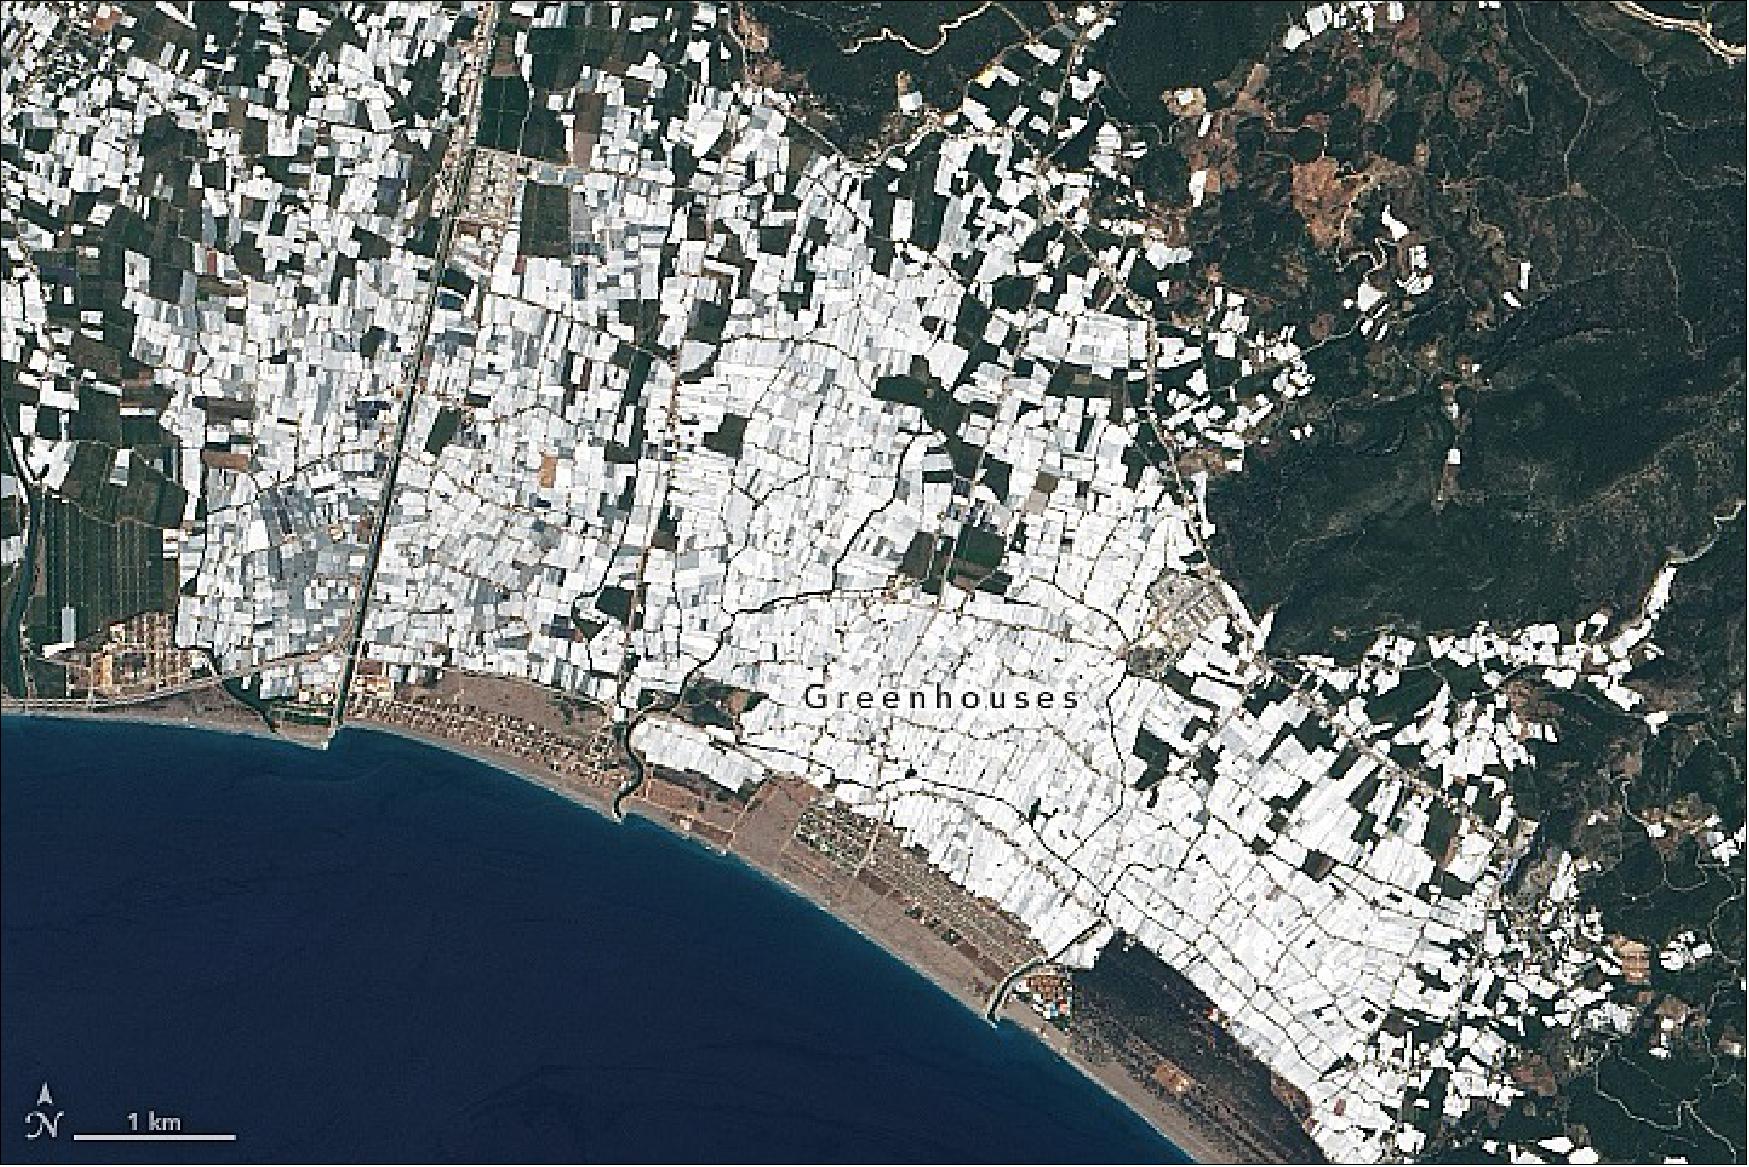 Figure 67: Detail image of the Kumluca greenhouses (image credit: NASA Earth Observatory)